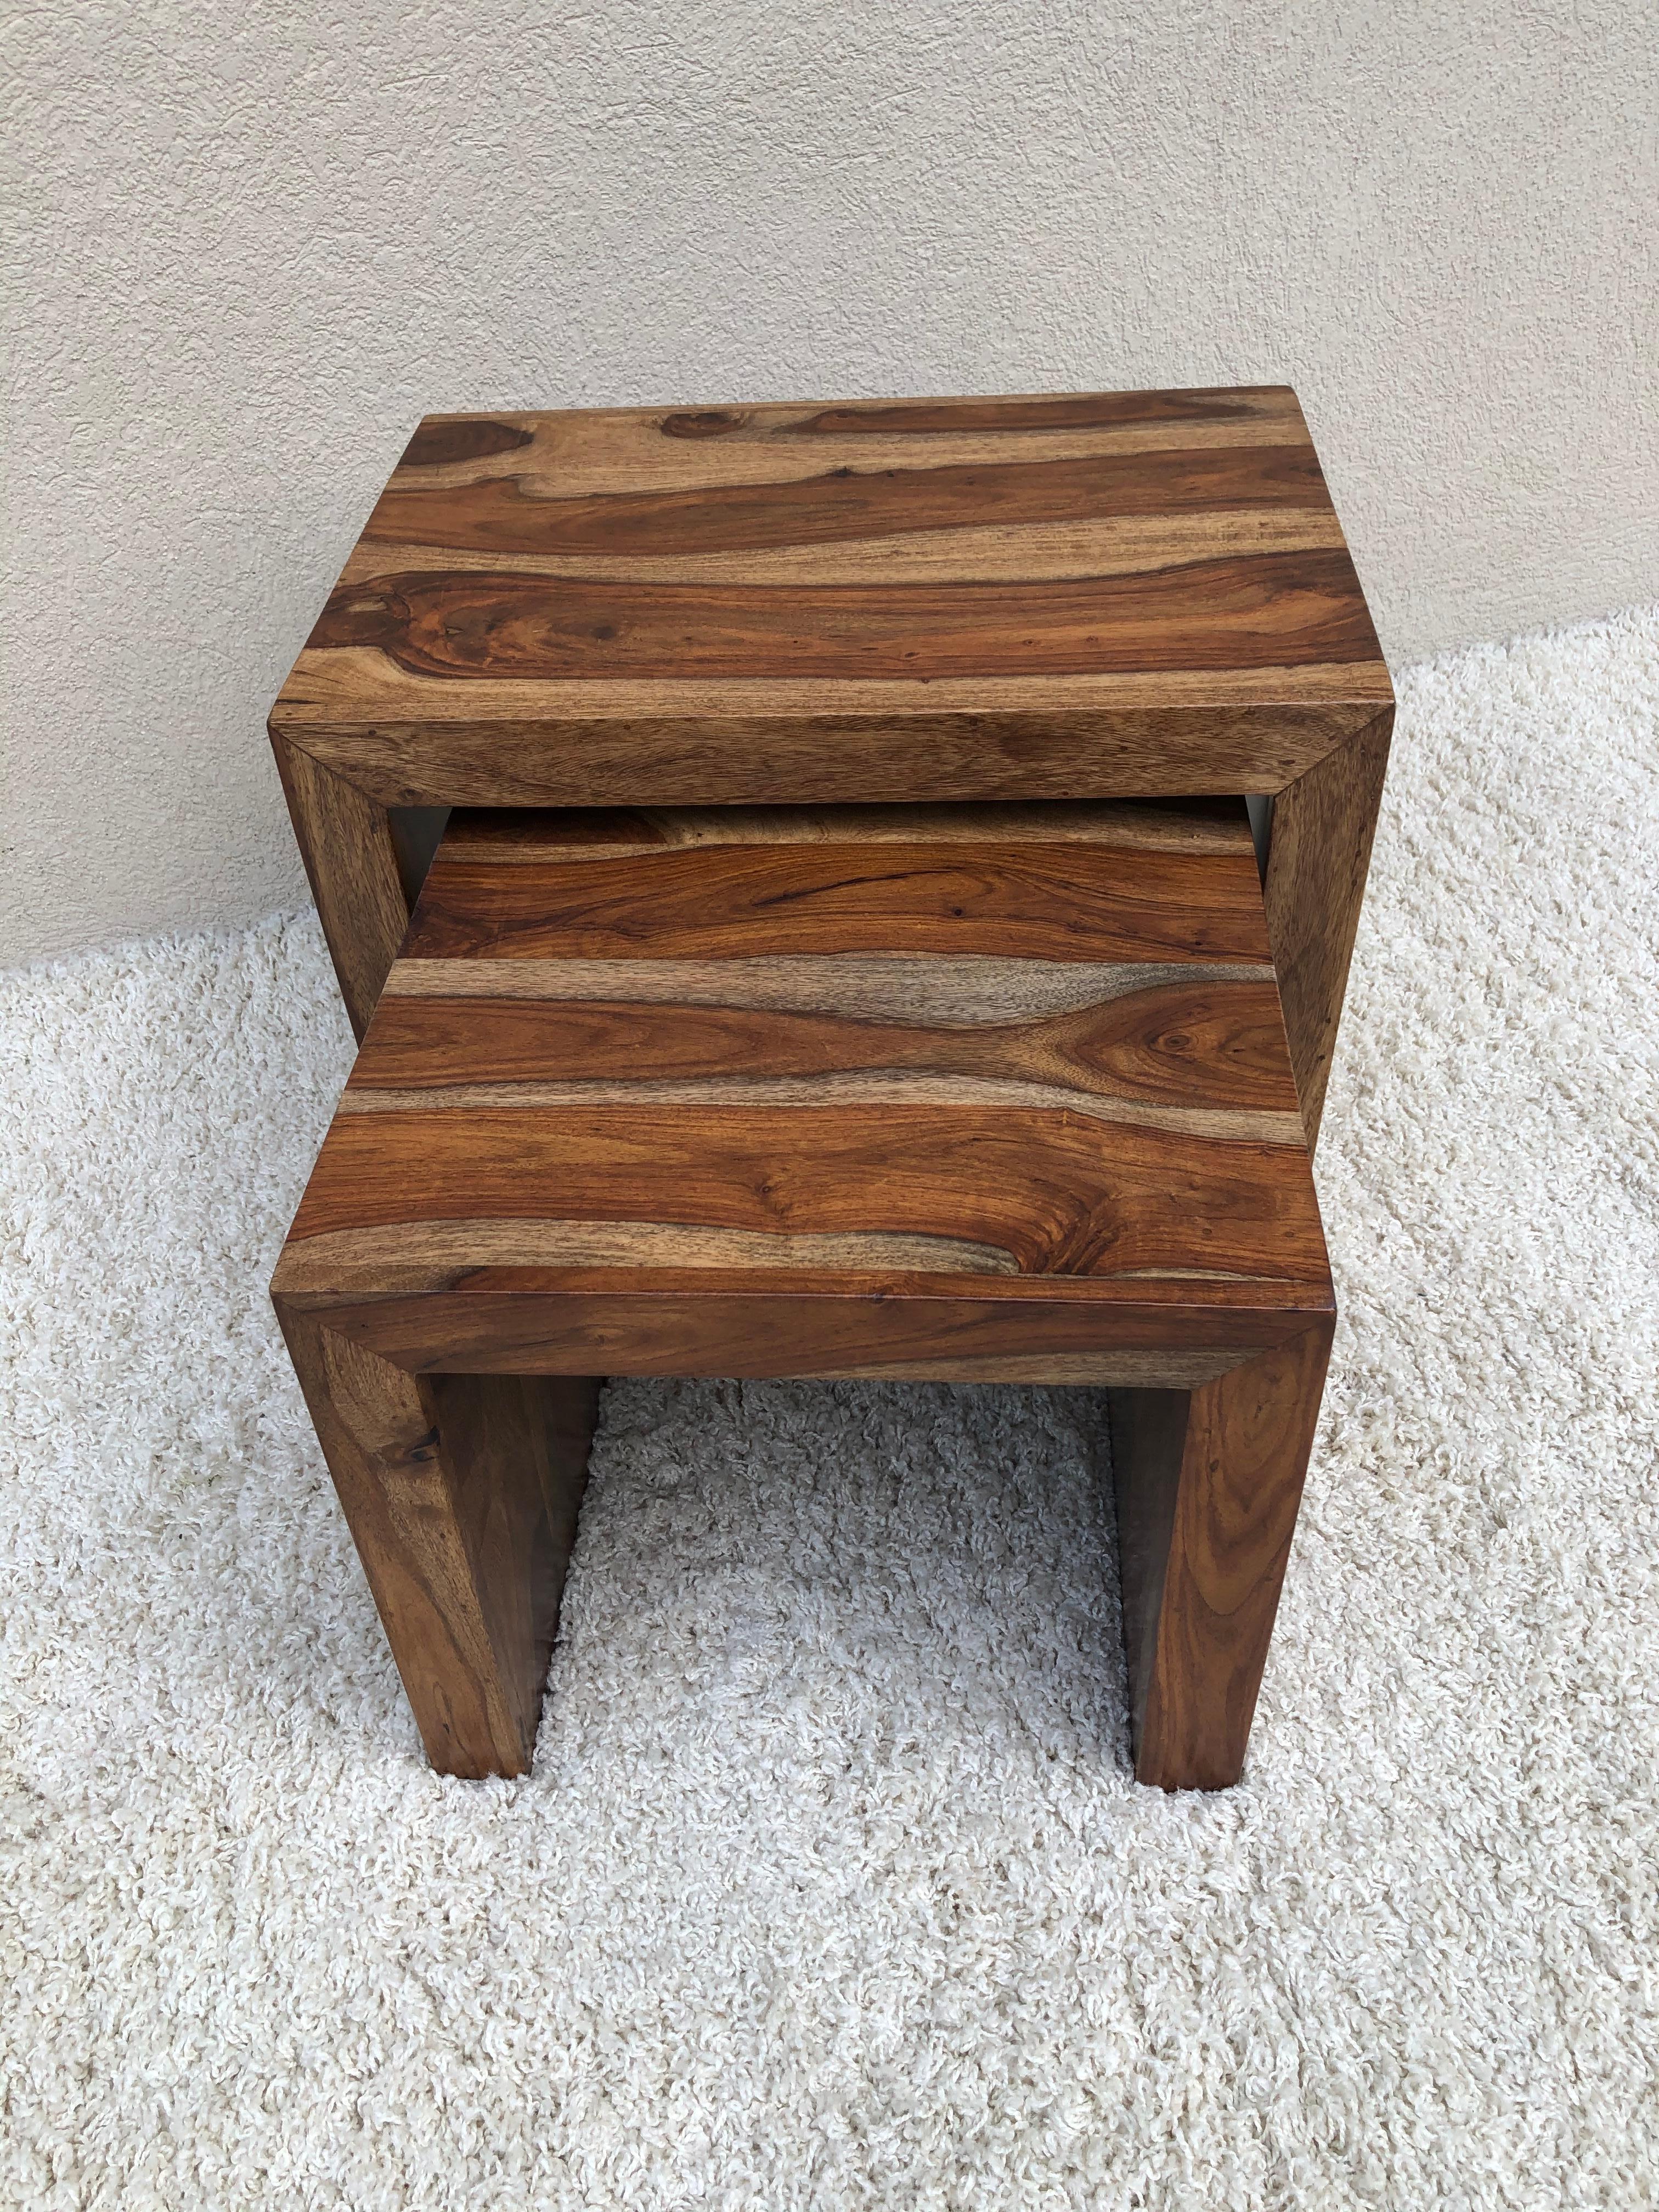 Parsons designed midcentury tiger wood nesting/ stacking tables.

Second table size fits underneath 16.25 x 14